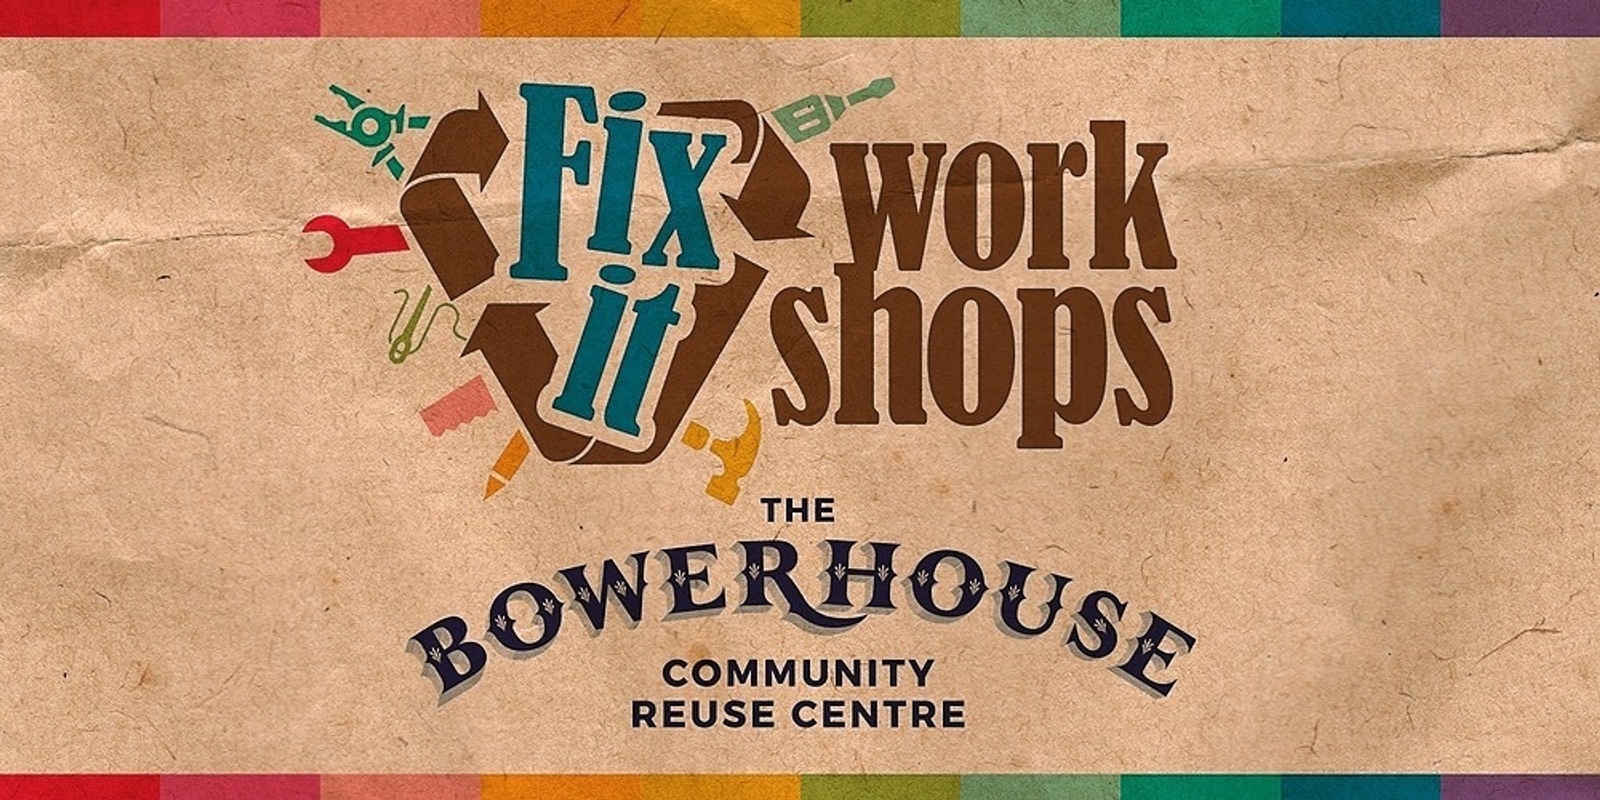 Clothing Repairs & Upcycling Fix It Workshop - The Bowerhouse Community Reuse Centre